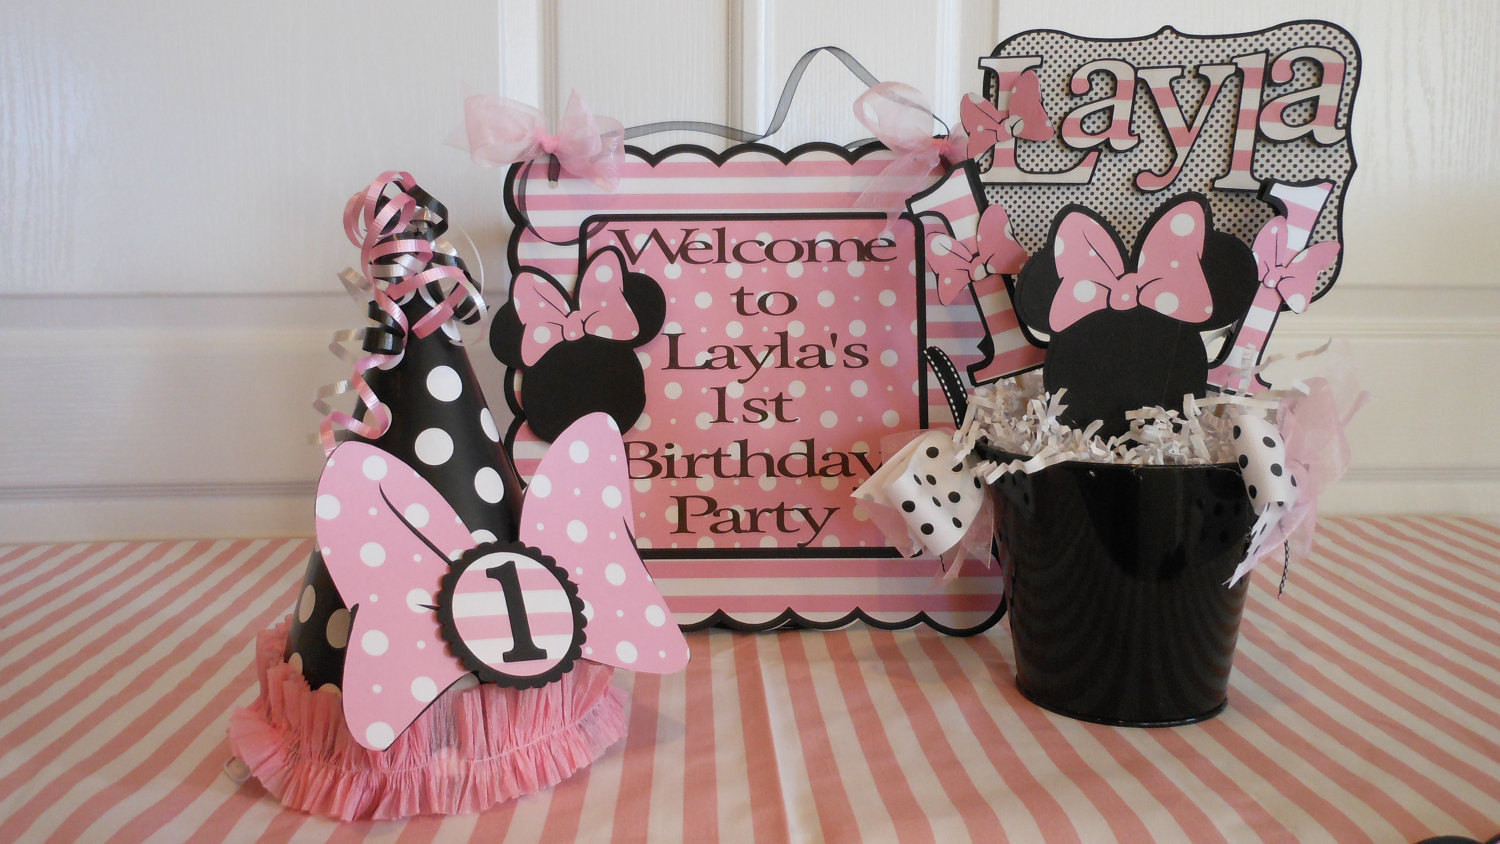 Minnie Mouse Ideas For 1st Birthday Party
 Minnie Mouse Polka Dot 1st Birthday Party by ASweetCelebration